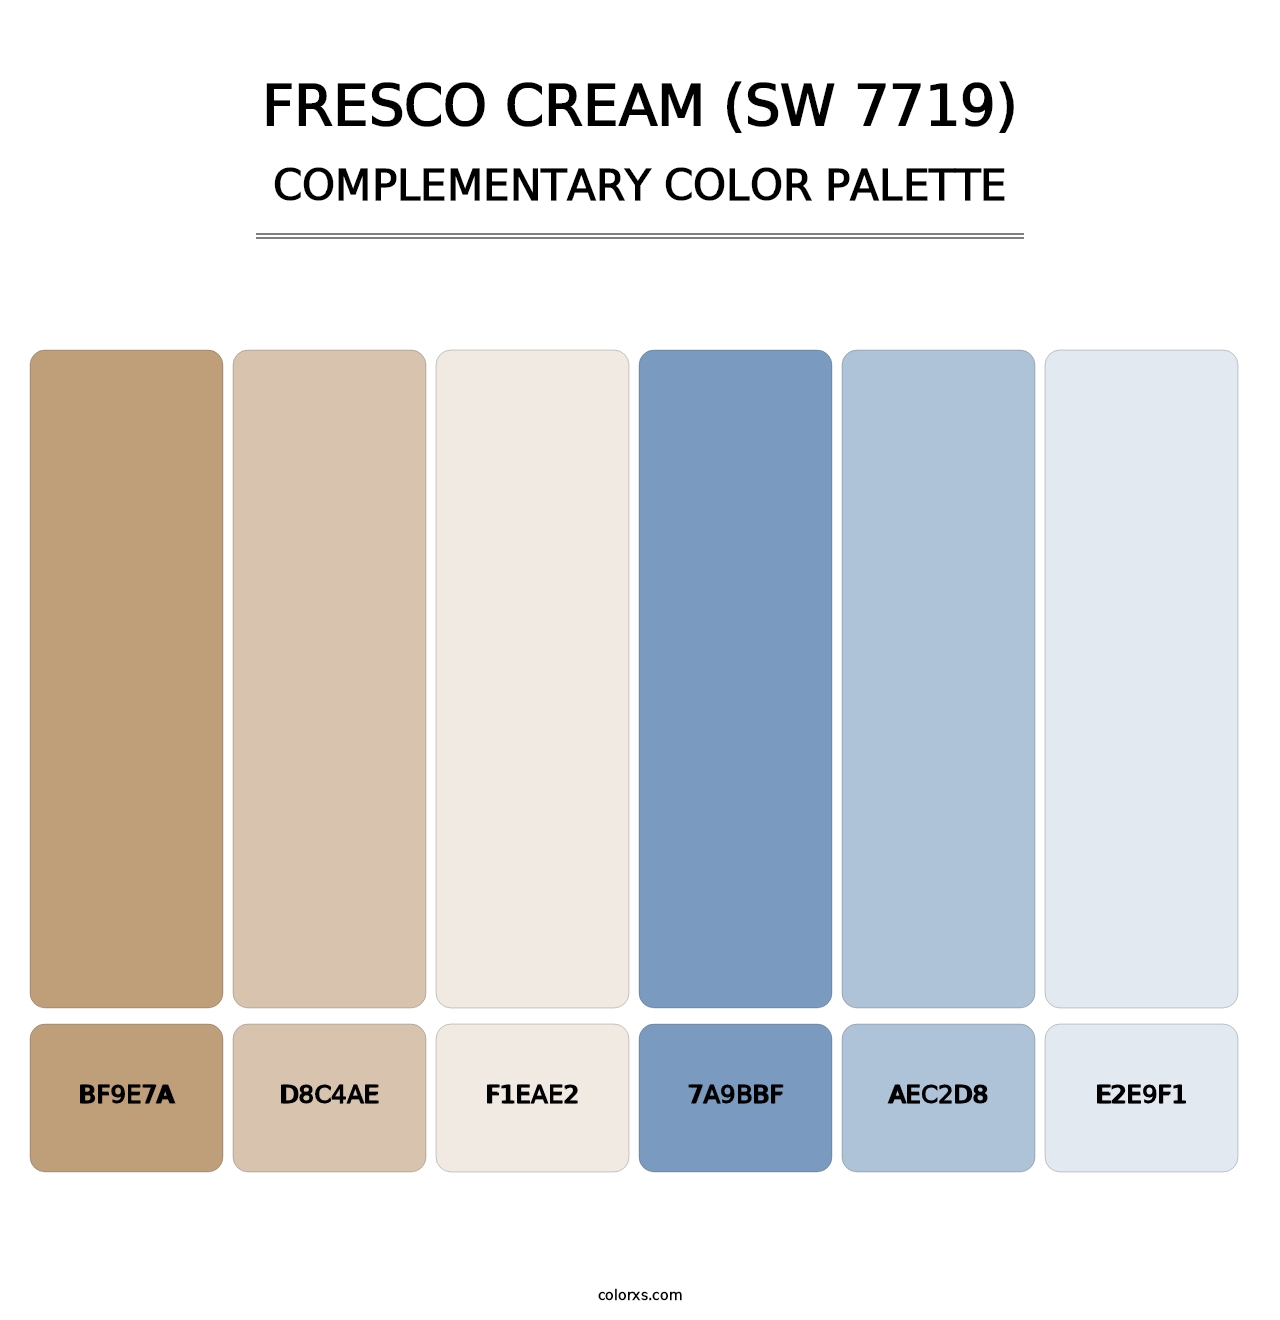 Fresco Cream (SW 7719) - Complementary Color Palette